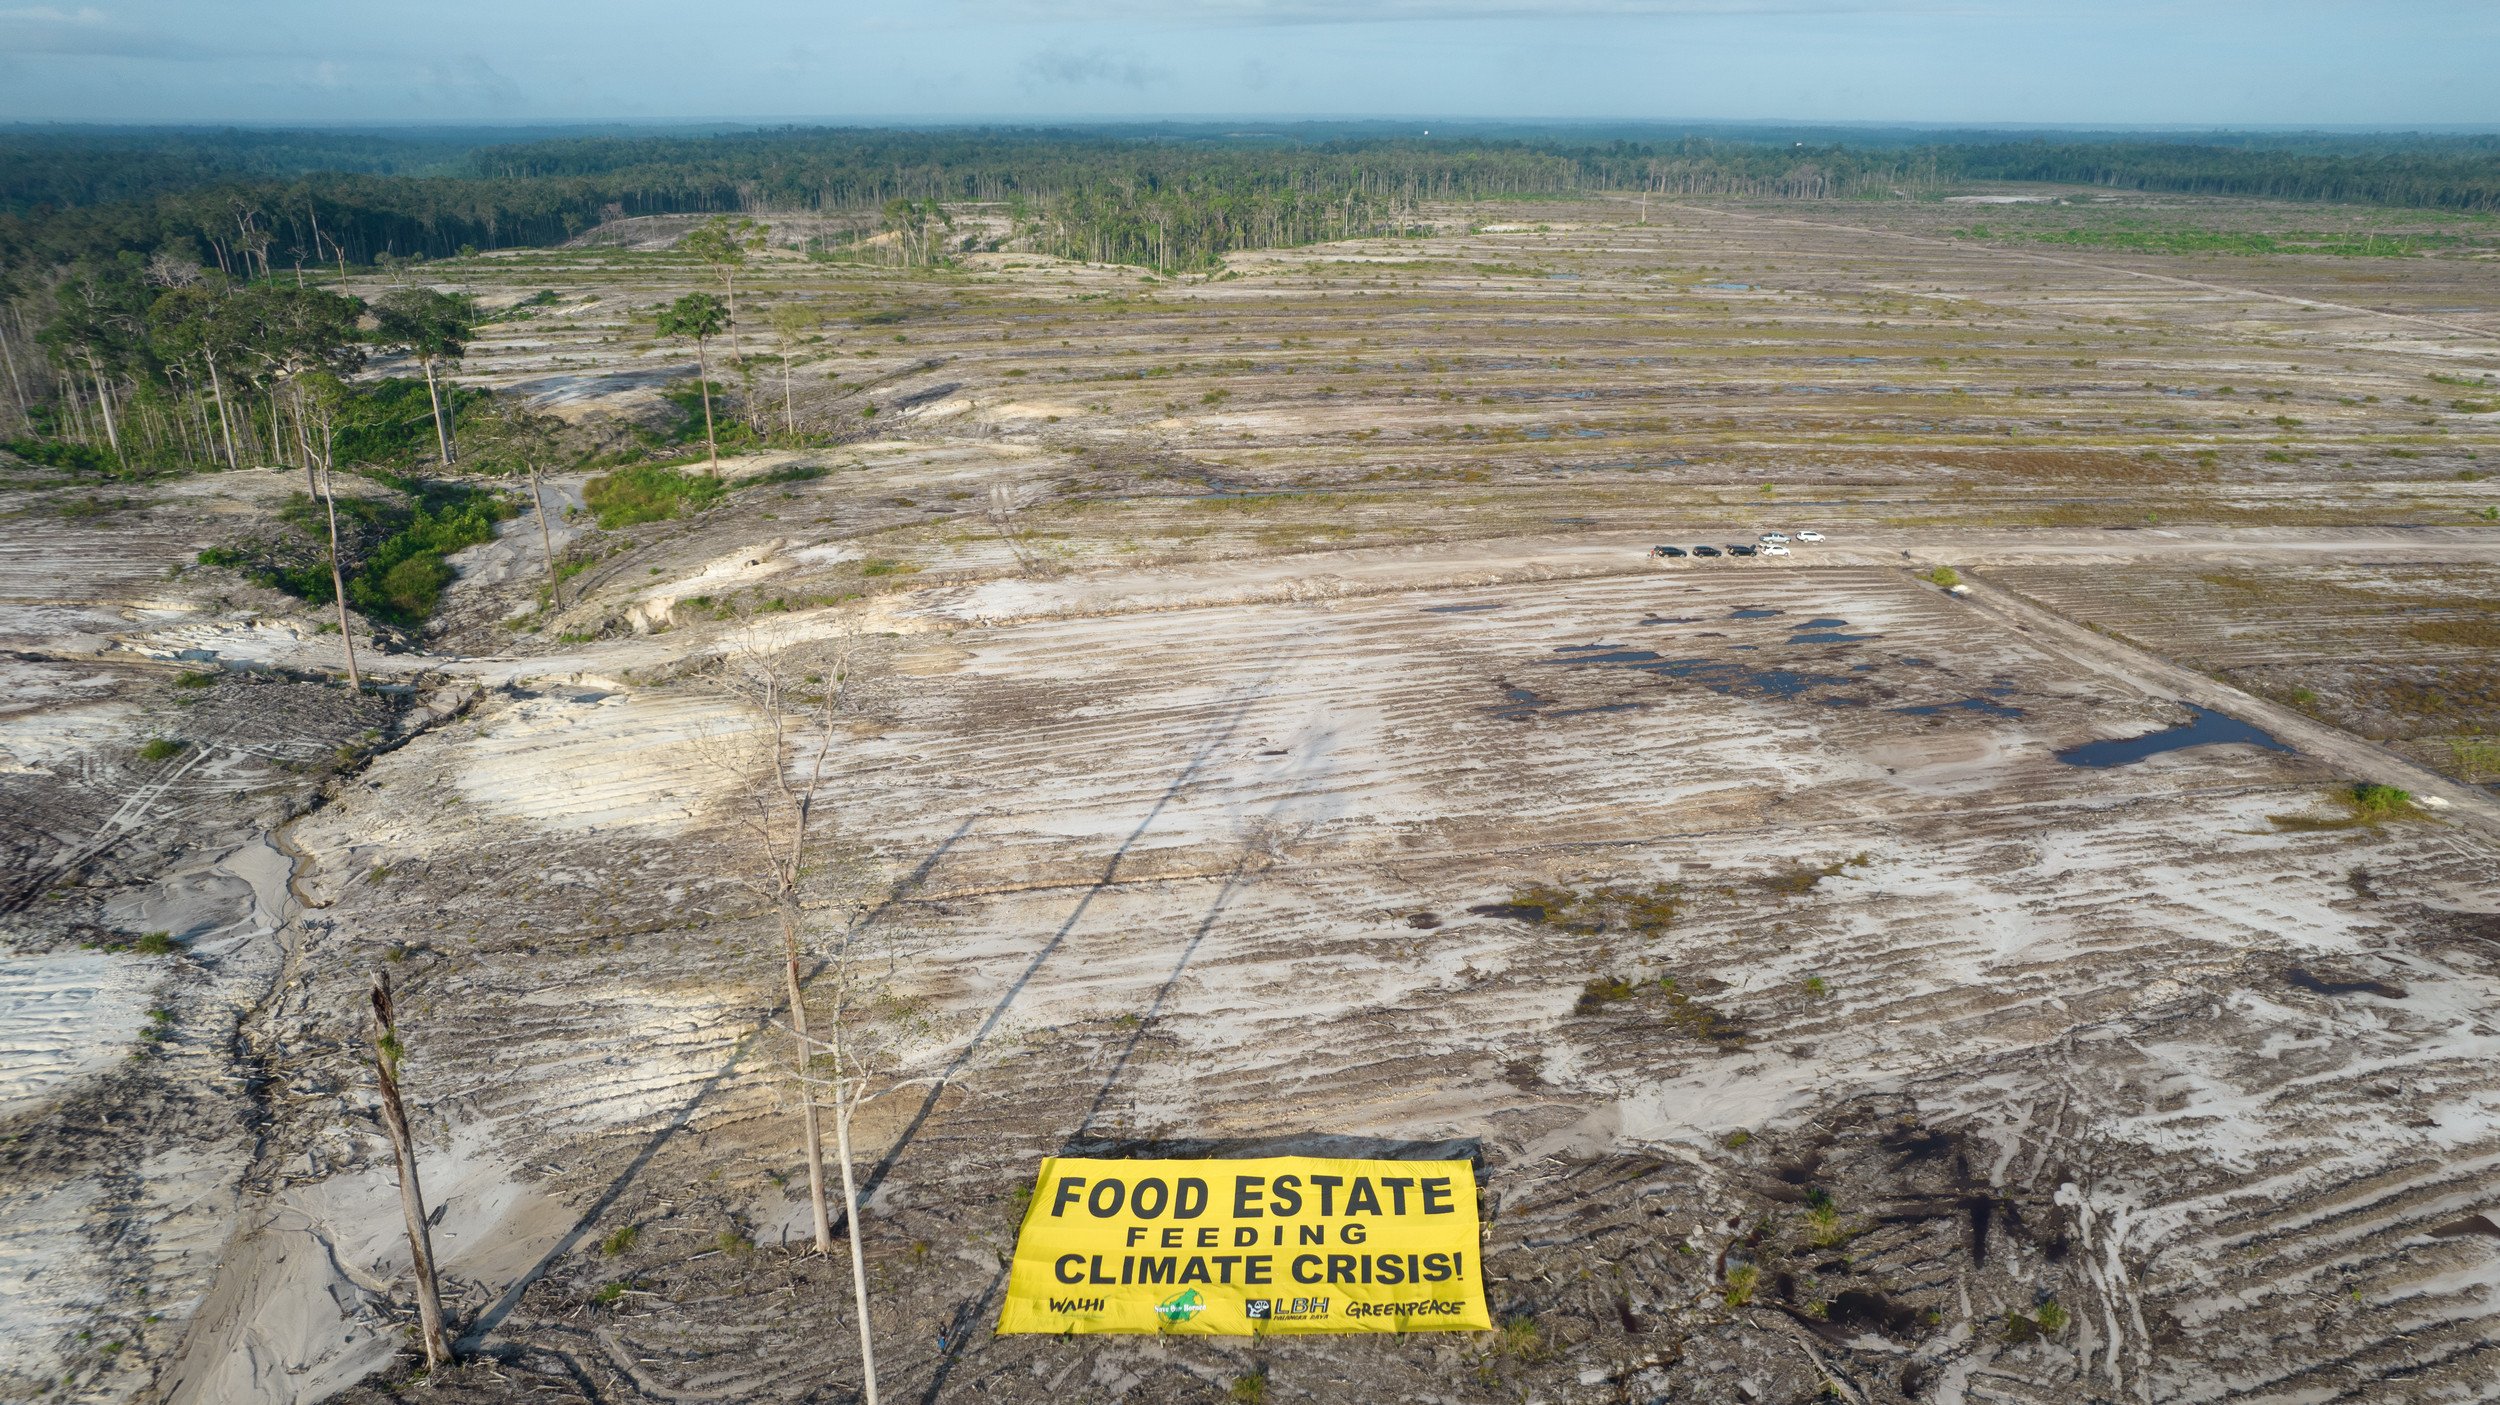 To protest the clearing of customary land in Kalimantan or Indonesian Borneo to make way for “food estates” or industrial agriculture programmes, climate activists in Indonesia unfurled a massive banner at Gunung Mas in Central Kalimantan that read “Food Estate Feeding Climate Crisis”. Photo: Greenpeace